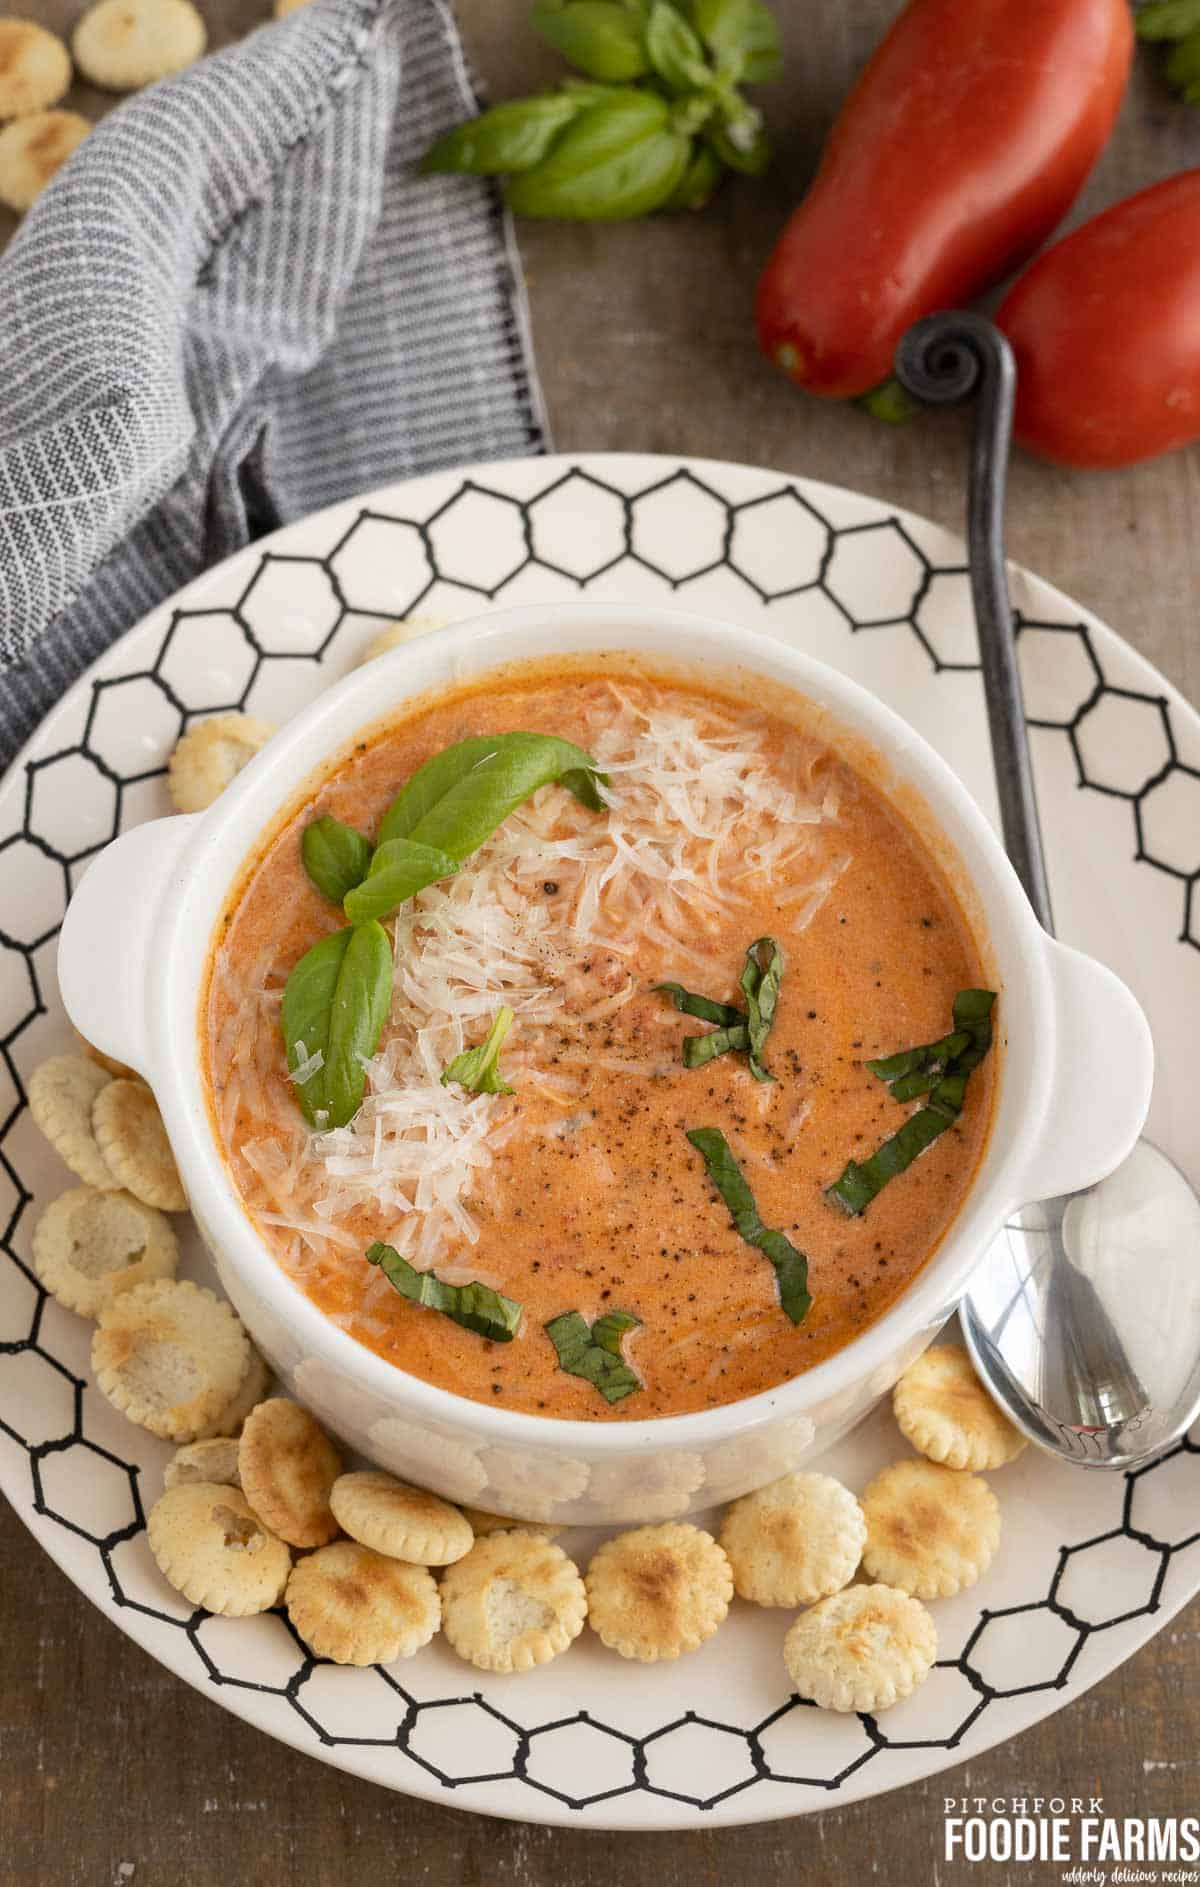 Creamy tomato soup with basil and fresh tomatoes in the background.